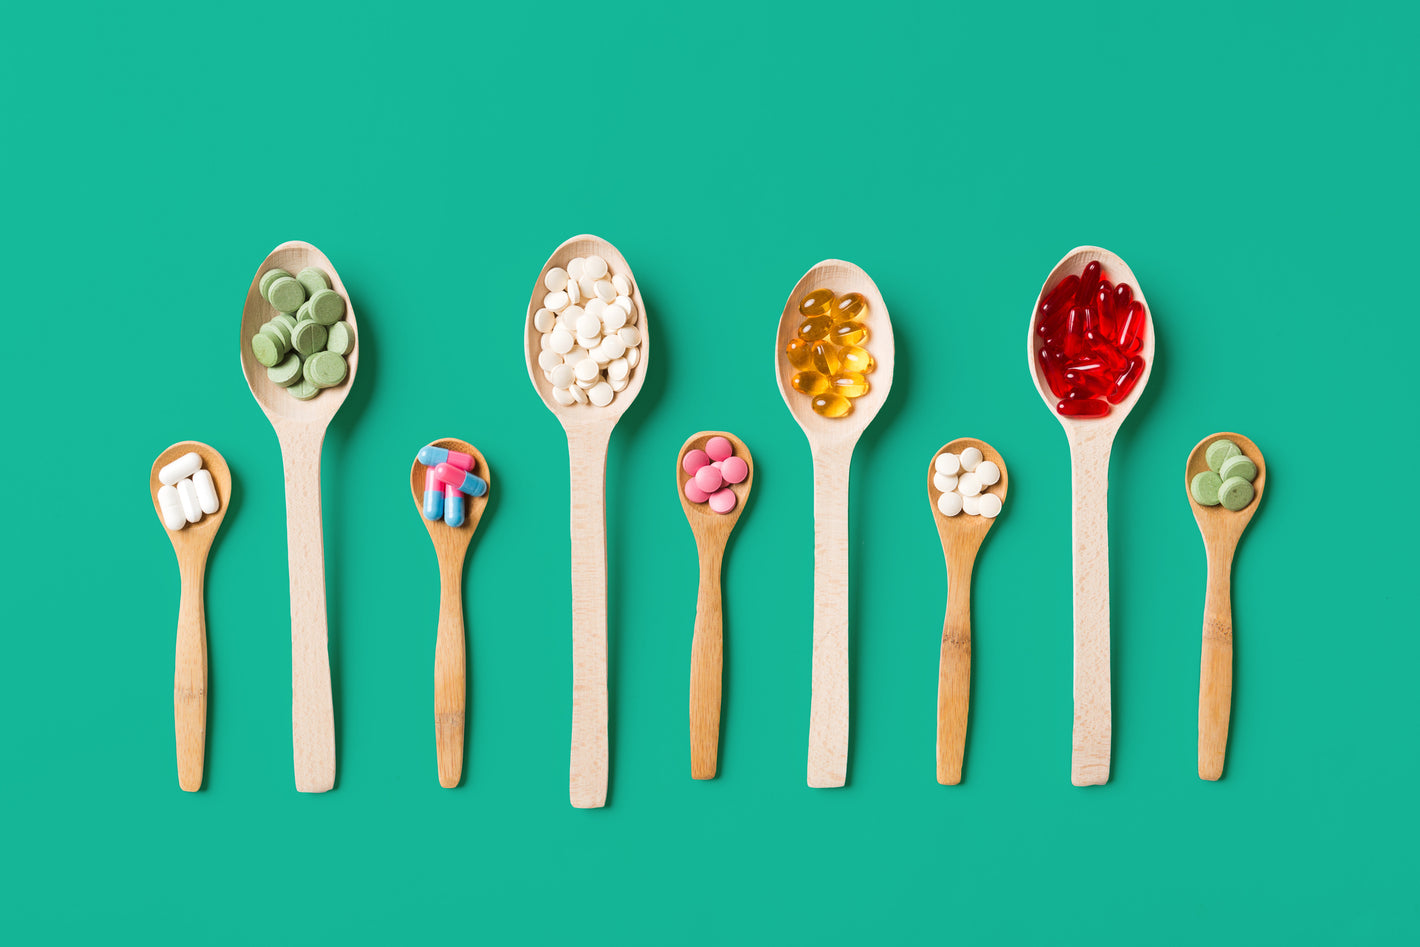 Various vitamin and supplement pills, tablets and capsules arranged on wooden spoons